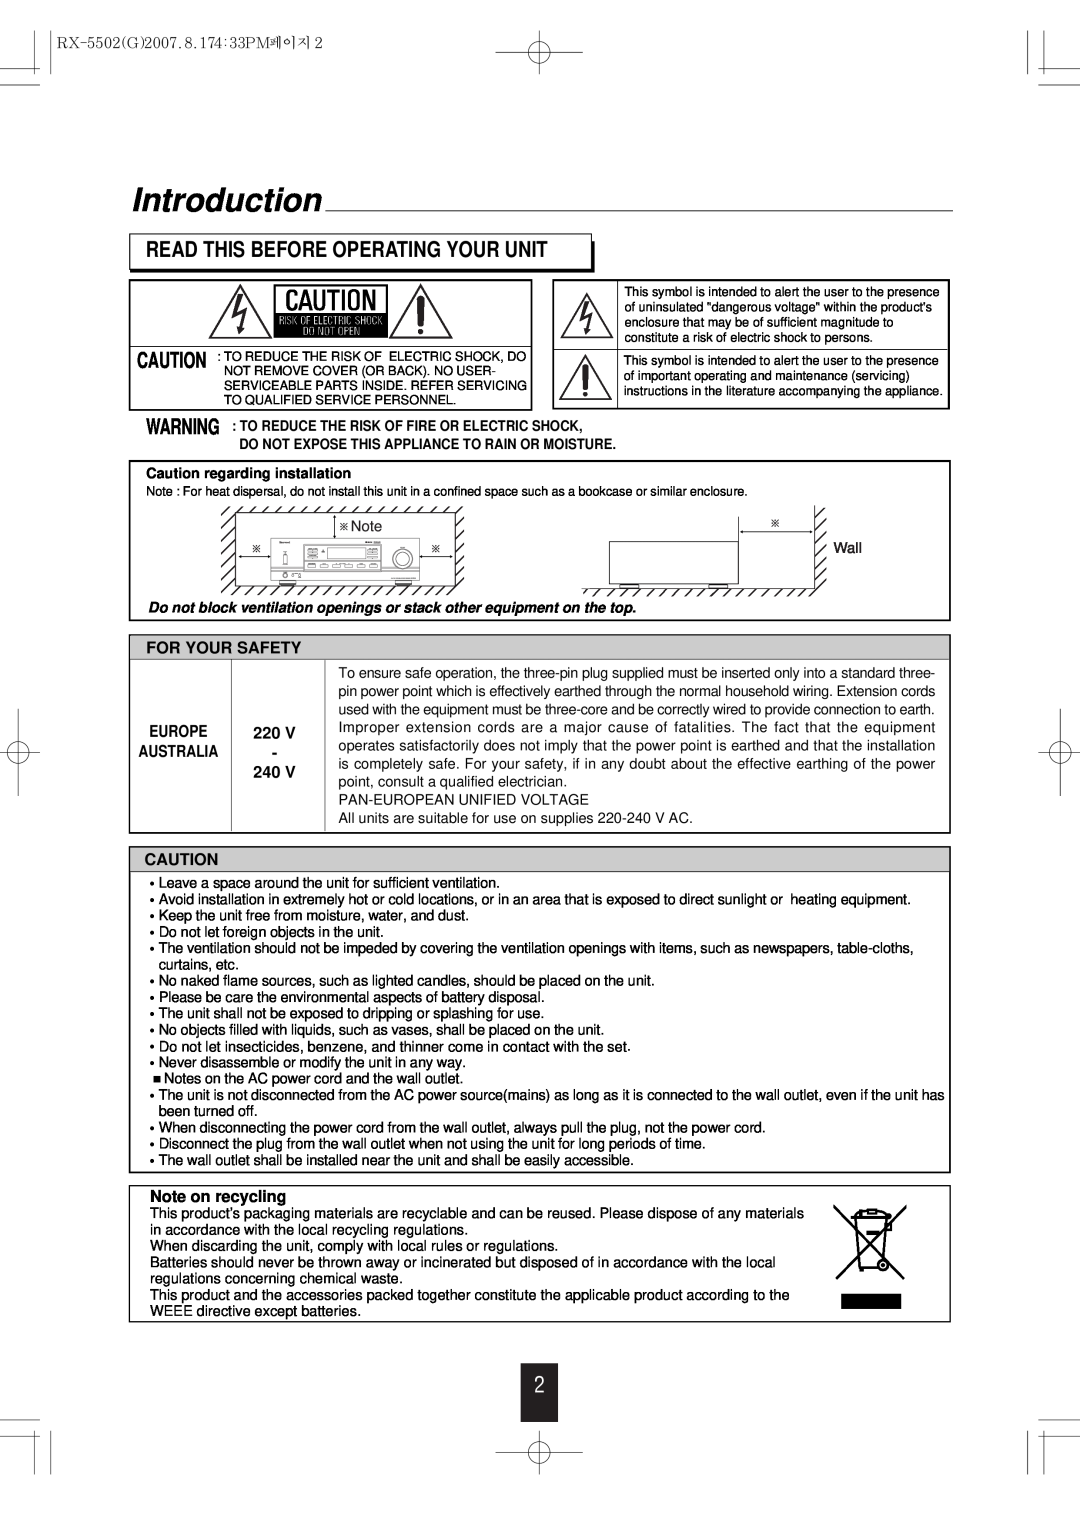 Sherwood RX-5502 manual Introduction, Read This Before Operating Your Unit, For Your Safety, Europe Australia, 220V 